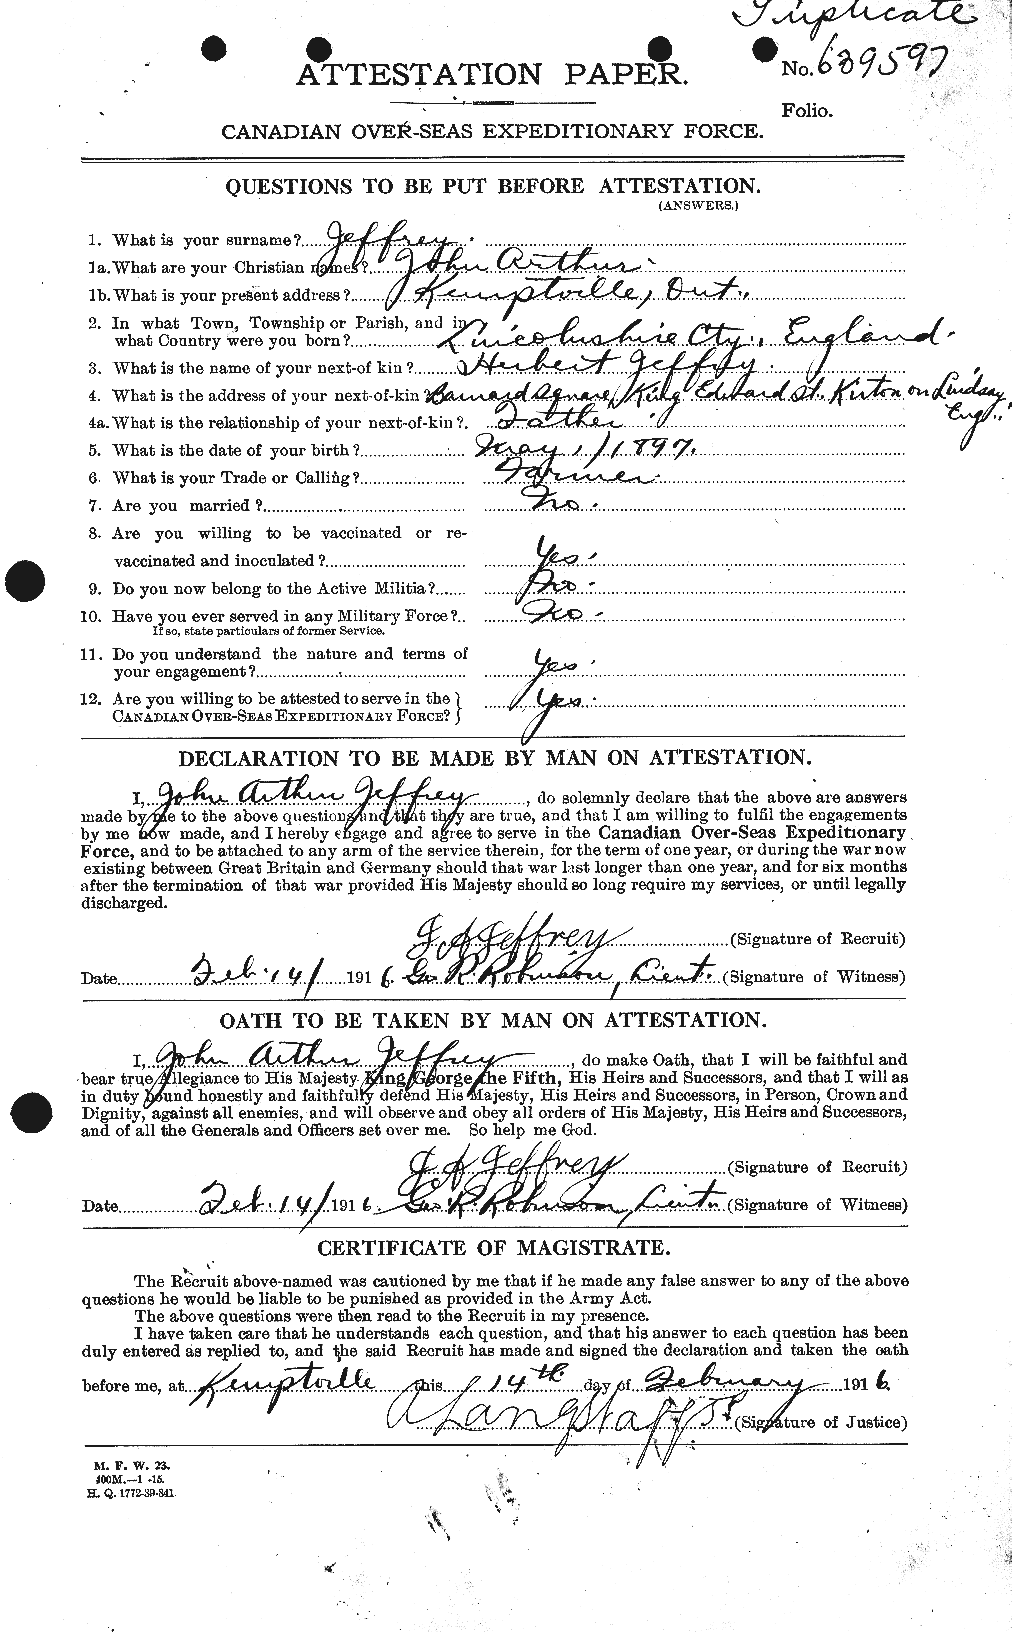 Personnel Records of the First World War - CEF 417912a